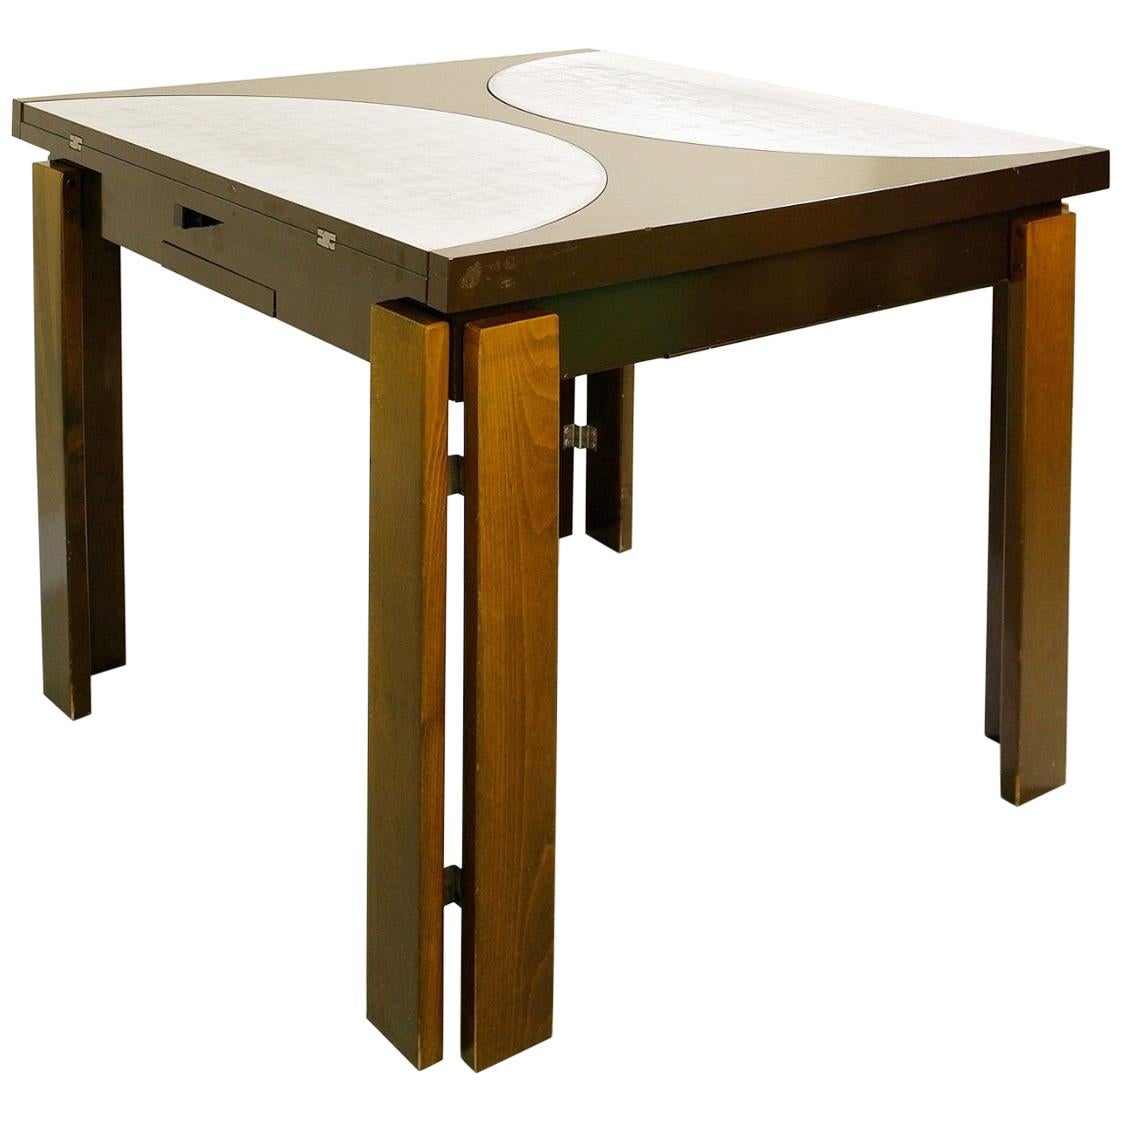 Extending Dining Table For Sale